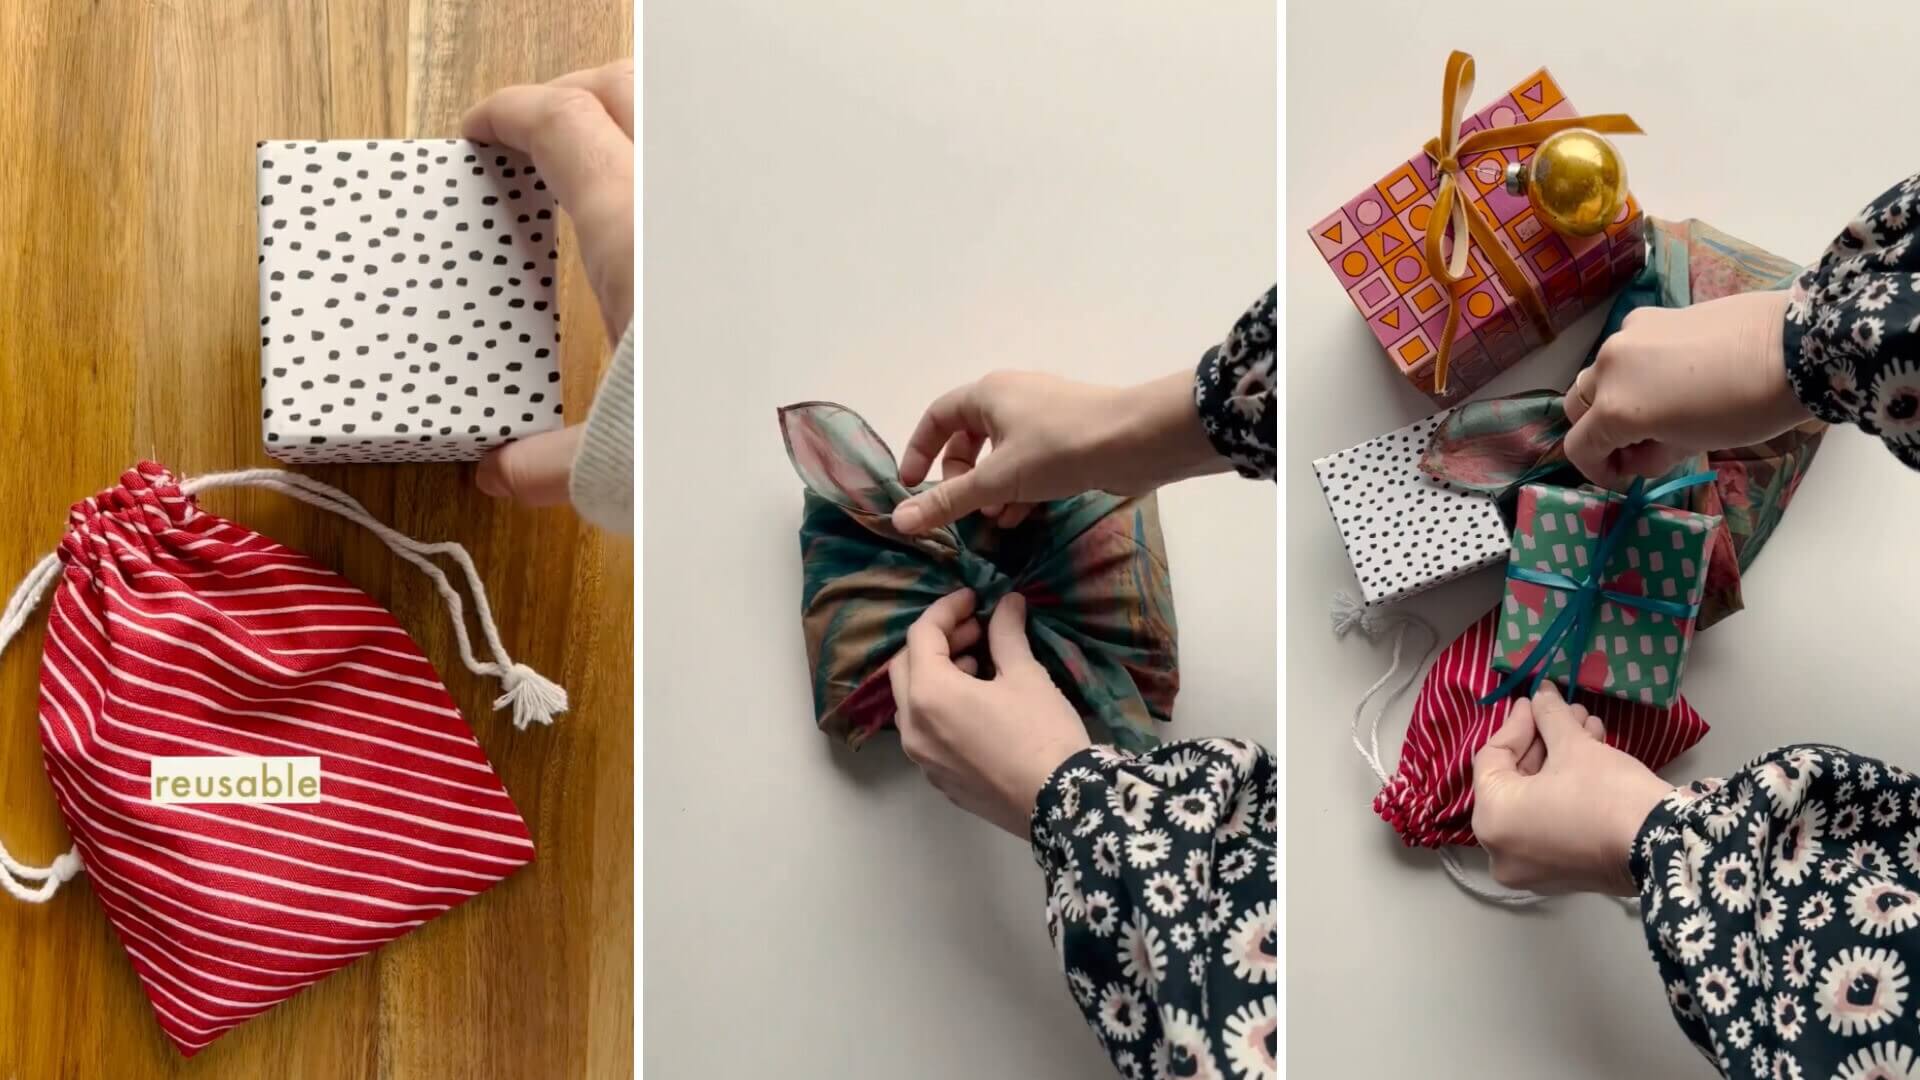 woman-shares-hack-for-wrapping-presents-without-wrapping-paper